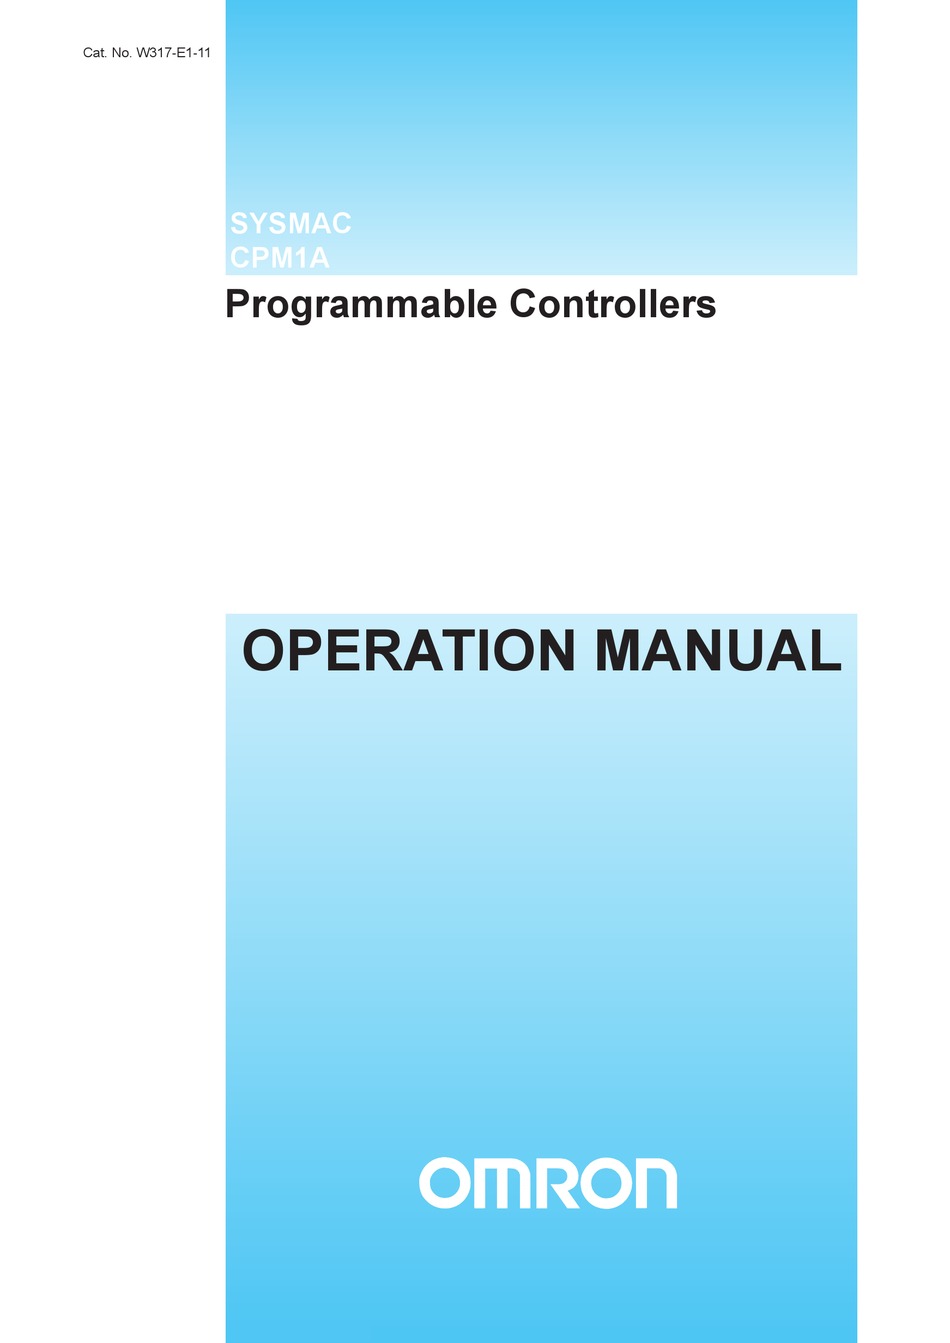 Omron SYSMAC Cpm1 Cpm1-20edr Programmable Controller for sale online 